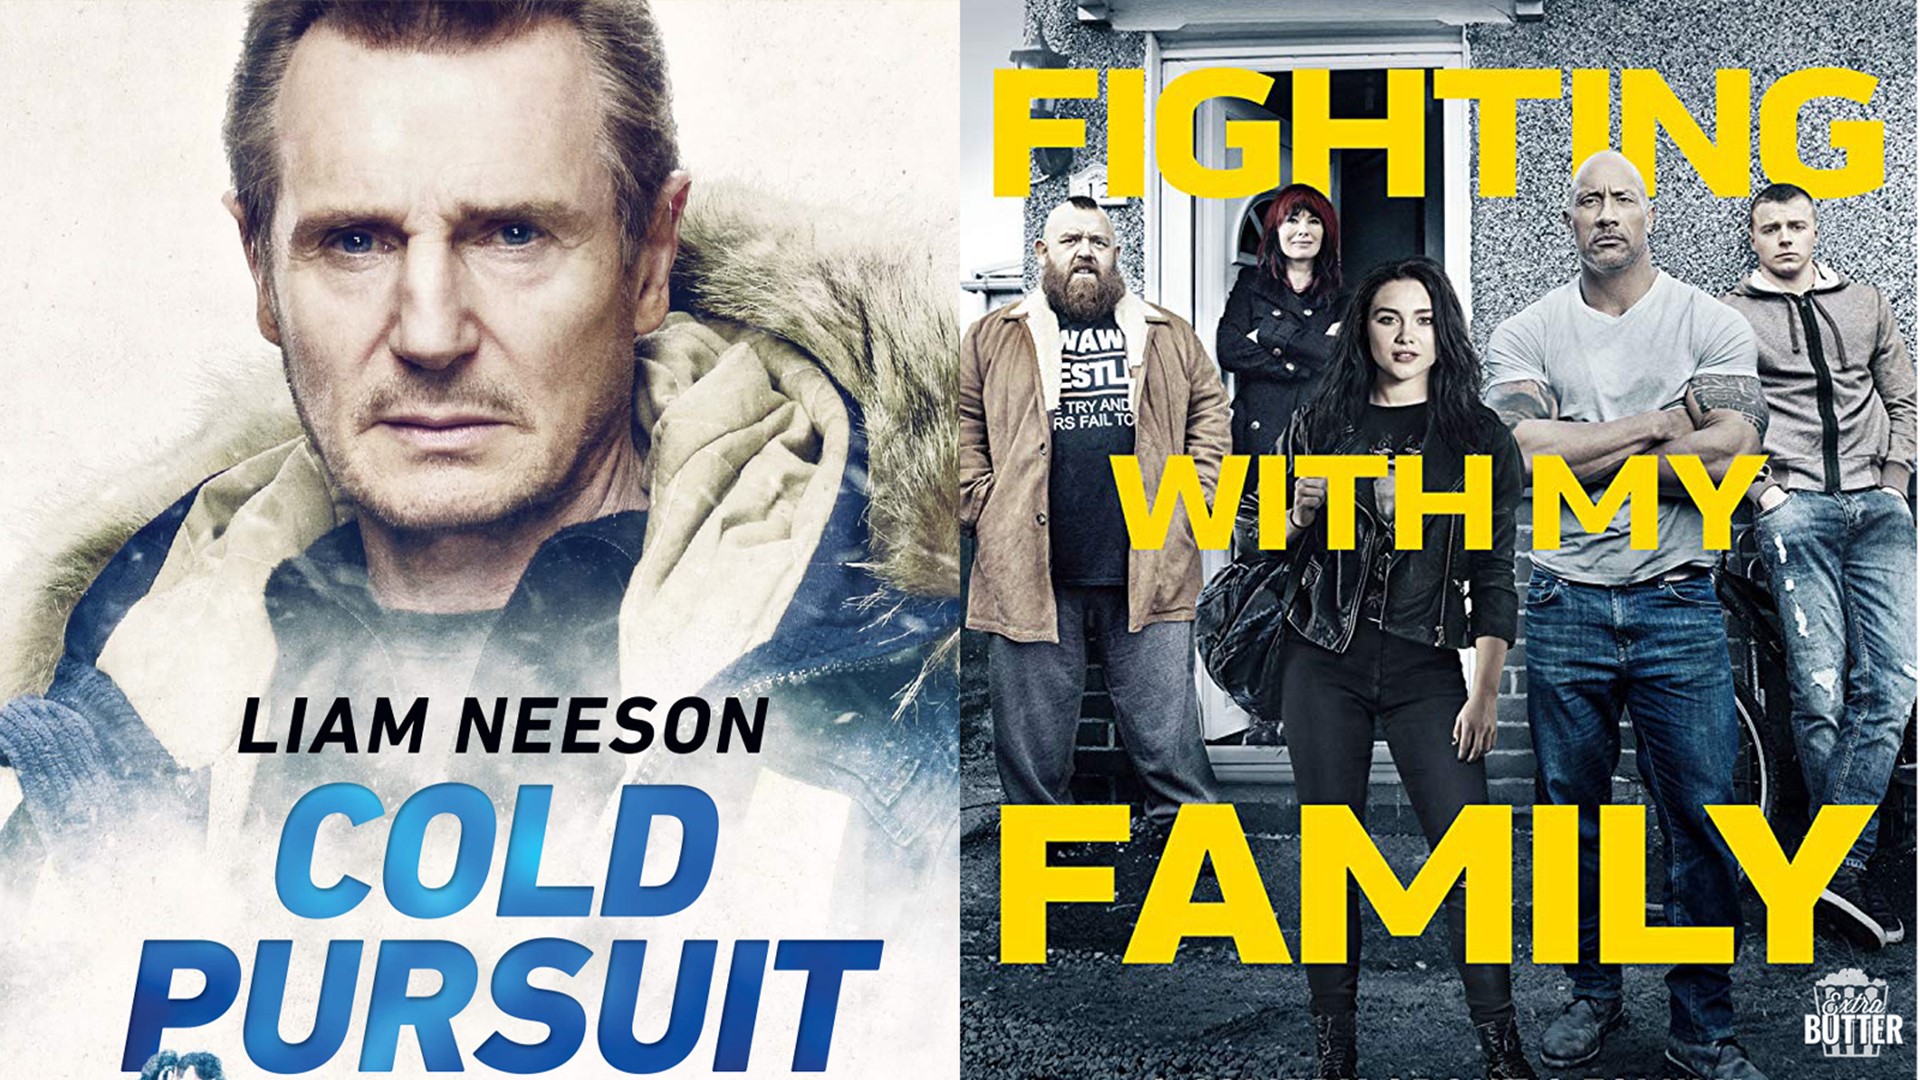 Liam Neeson talks about the comedy in his new thriller 'Cold Pursuit,' now available on DVD. Also, hear from Paige about the movie 'Fighting With My Family.'